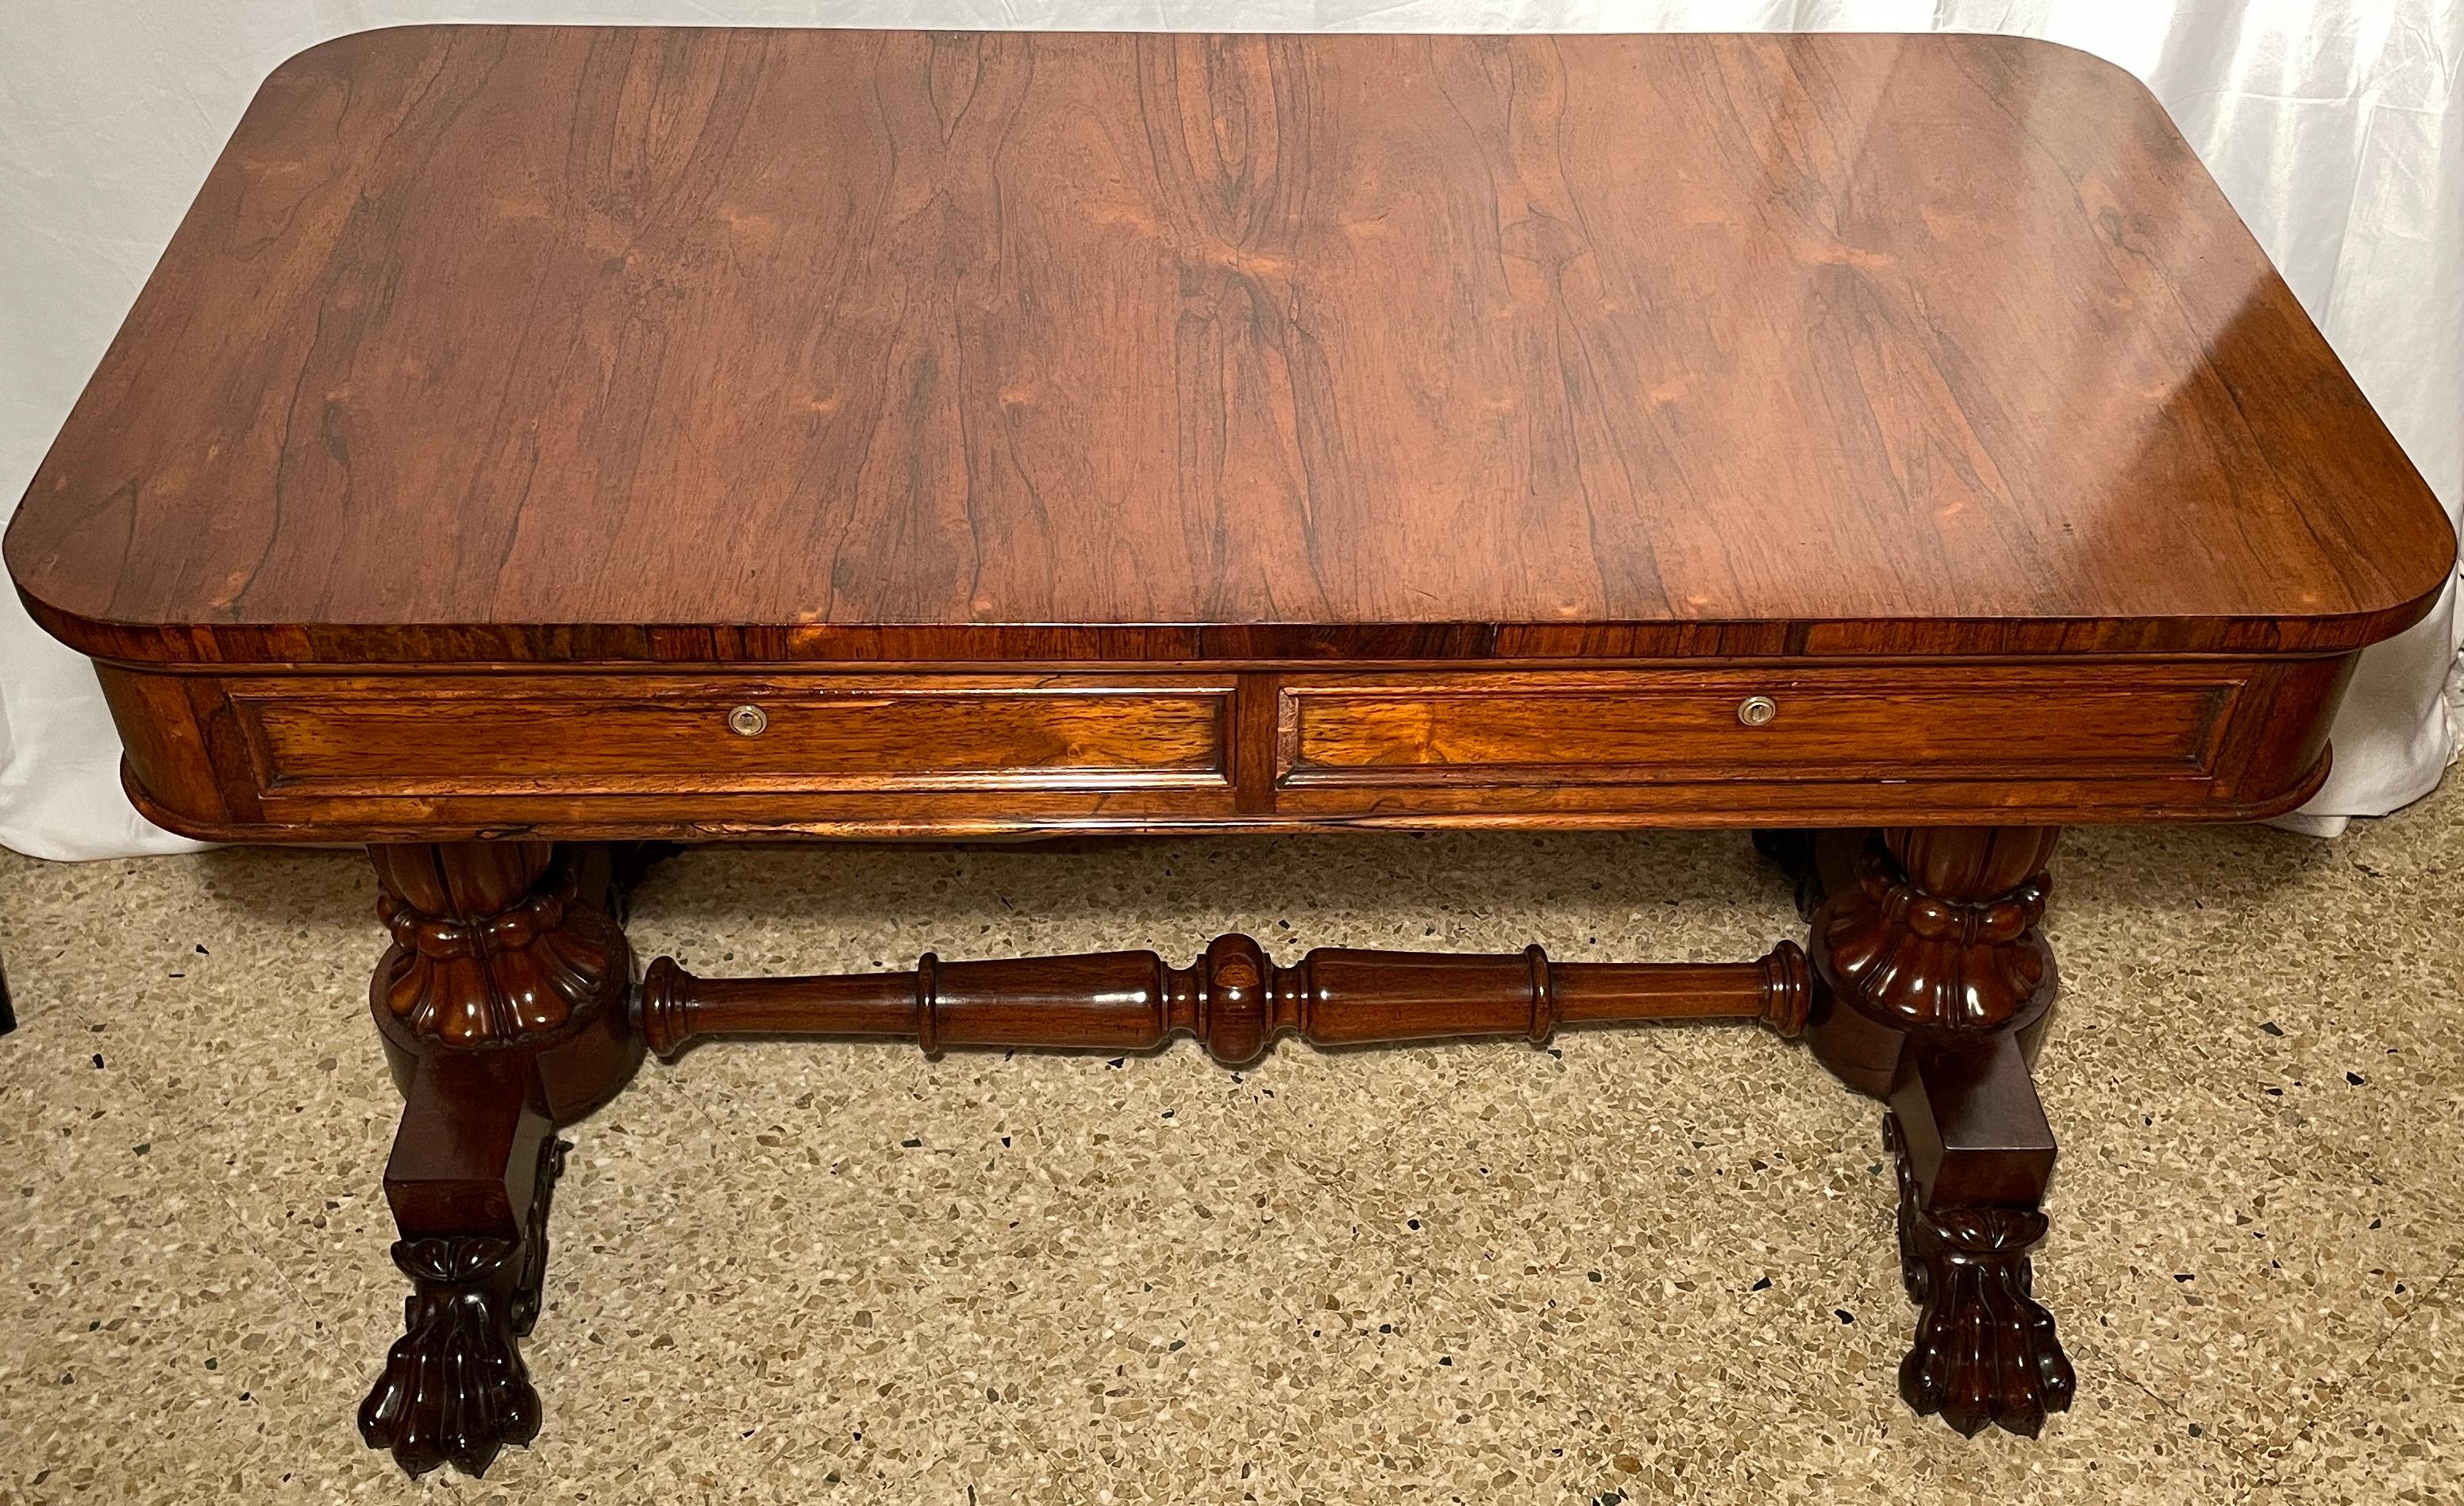 Antique English rosewood library table, circa 1860.